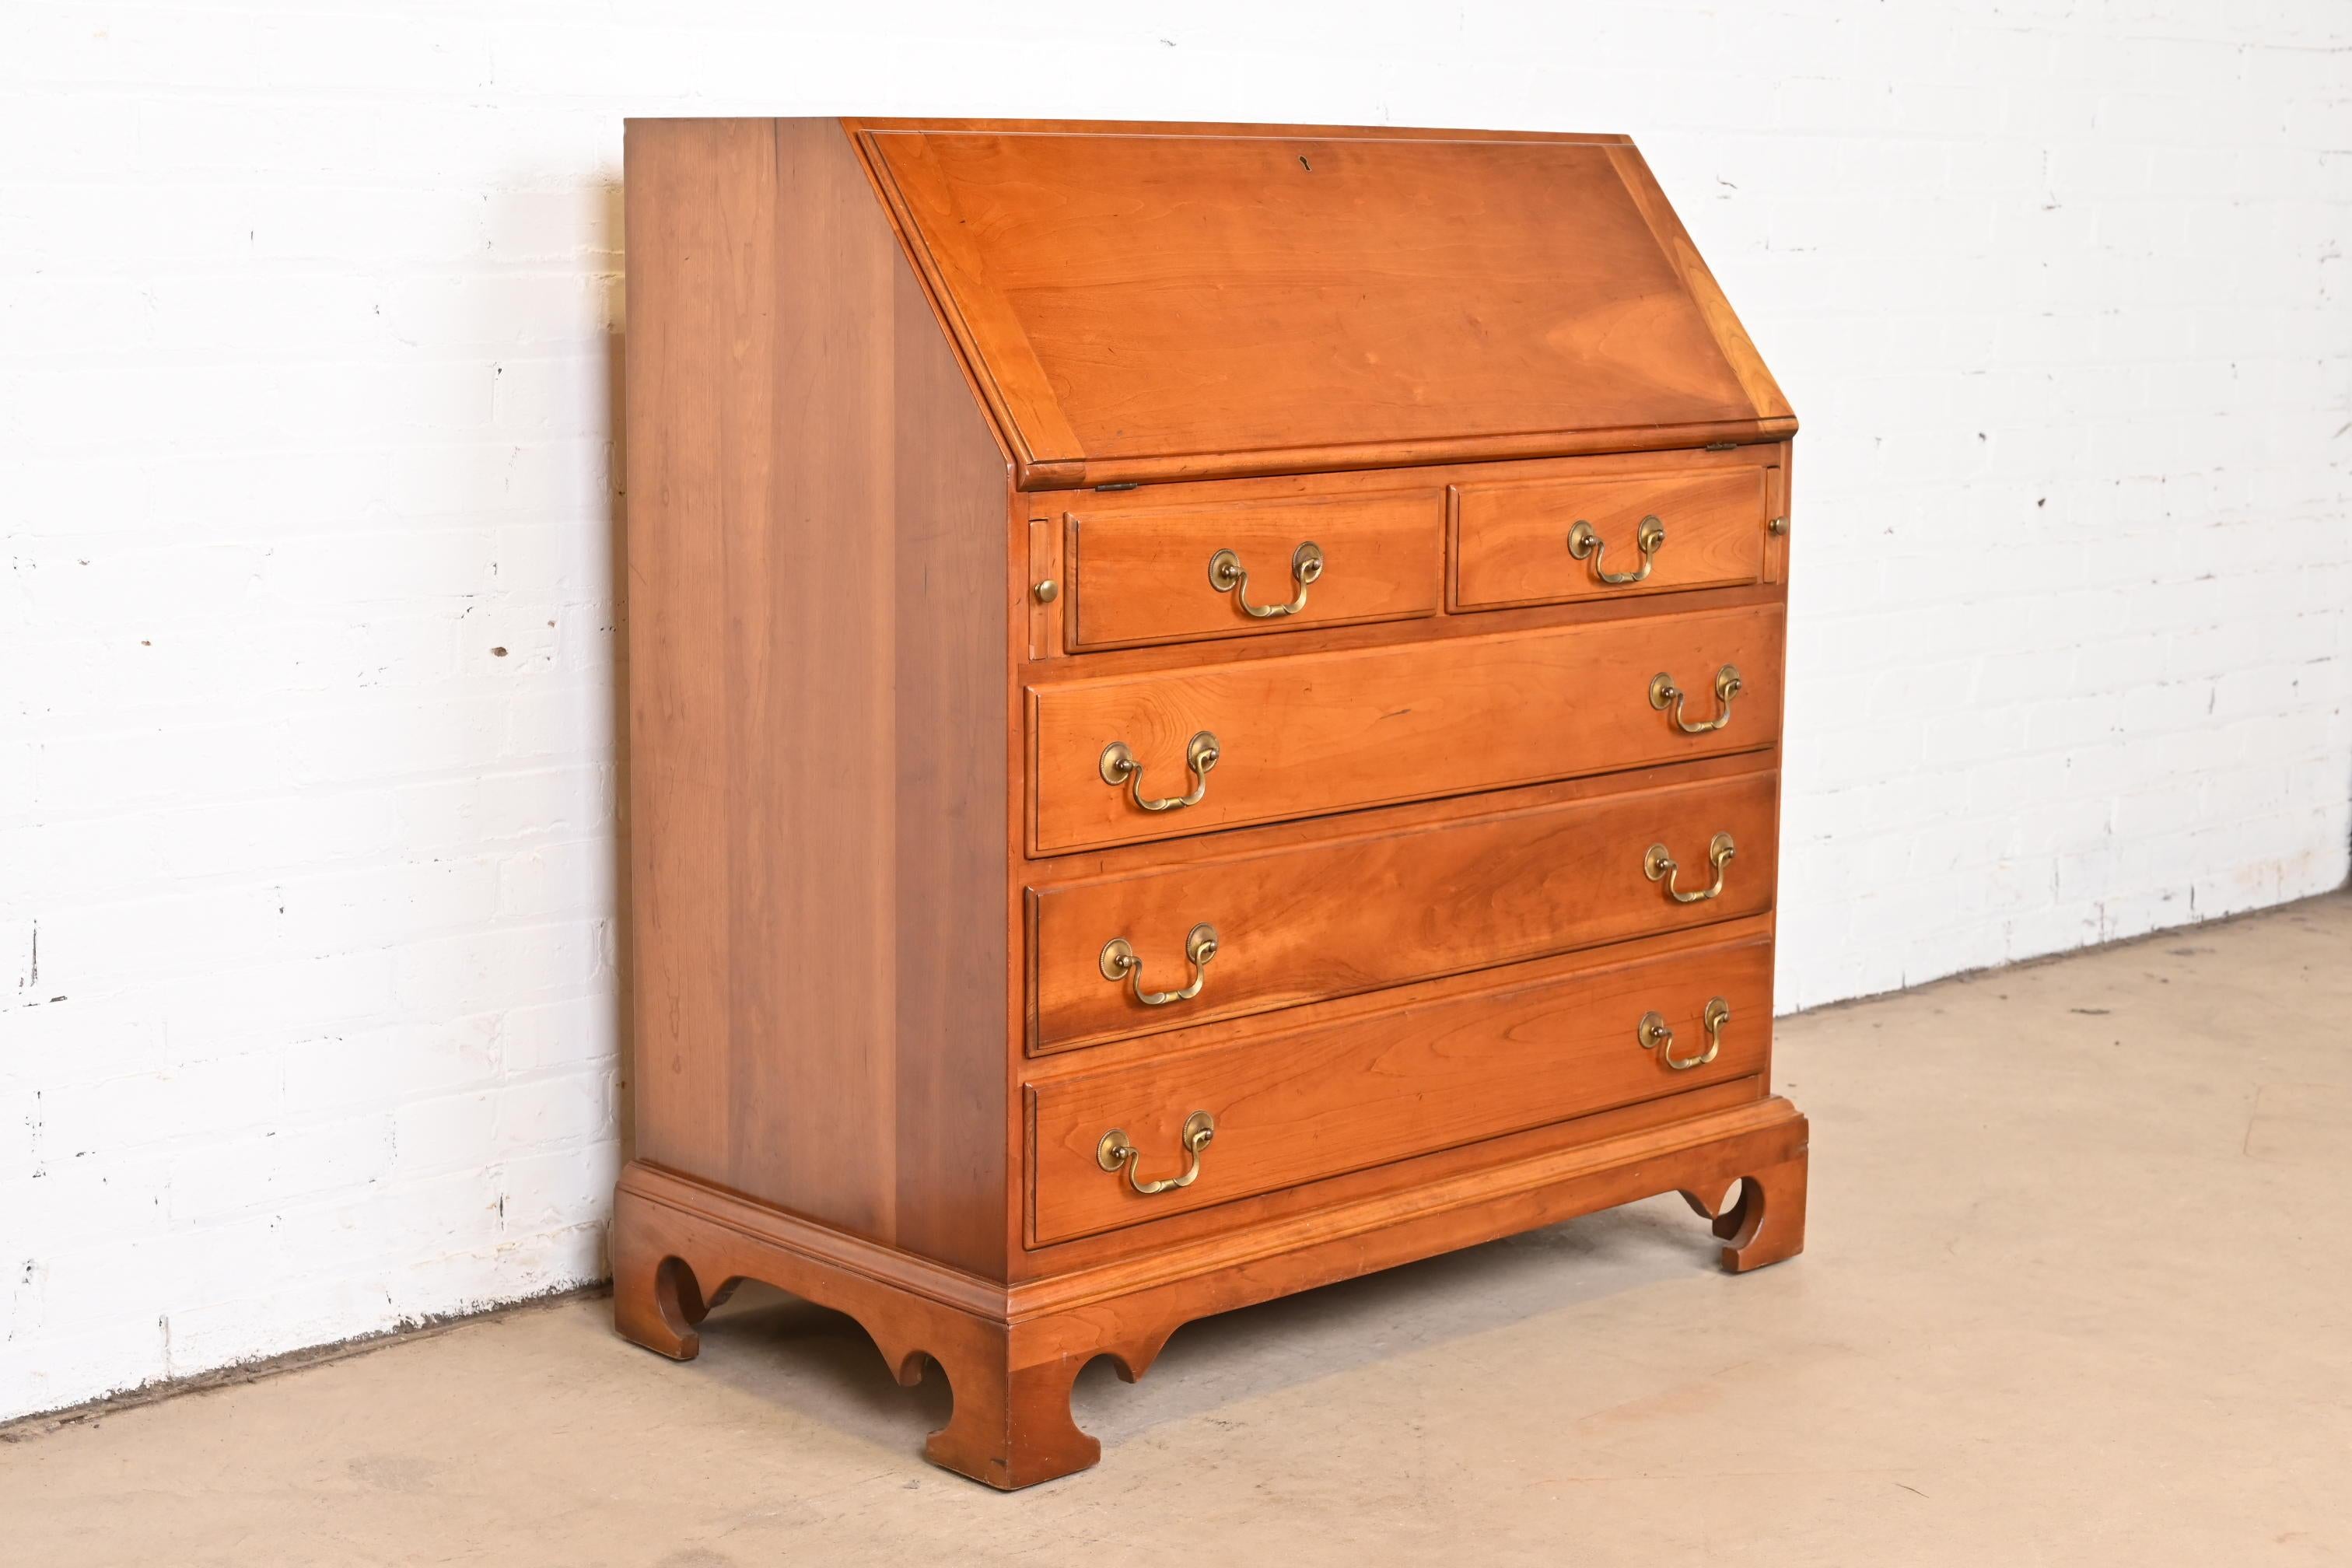 L. & J.G. Stickley American Chippendale Cherry Wood Slant Front Secretary Desk In Good Condition For Sale In South Bend, IN